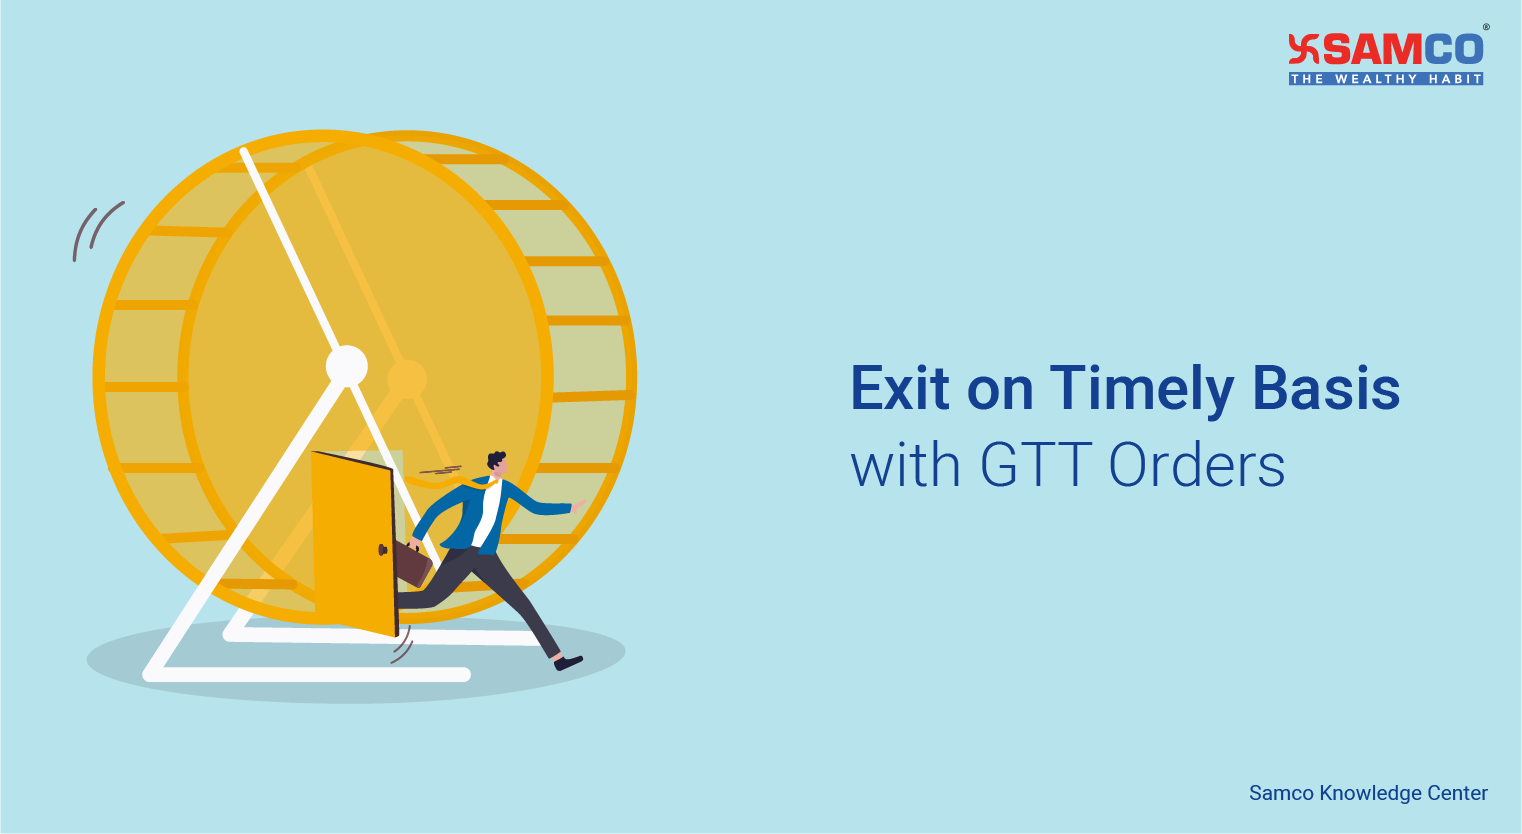 Exit on Timely Basis with GTT Orders